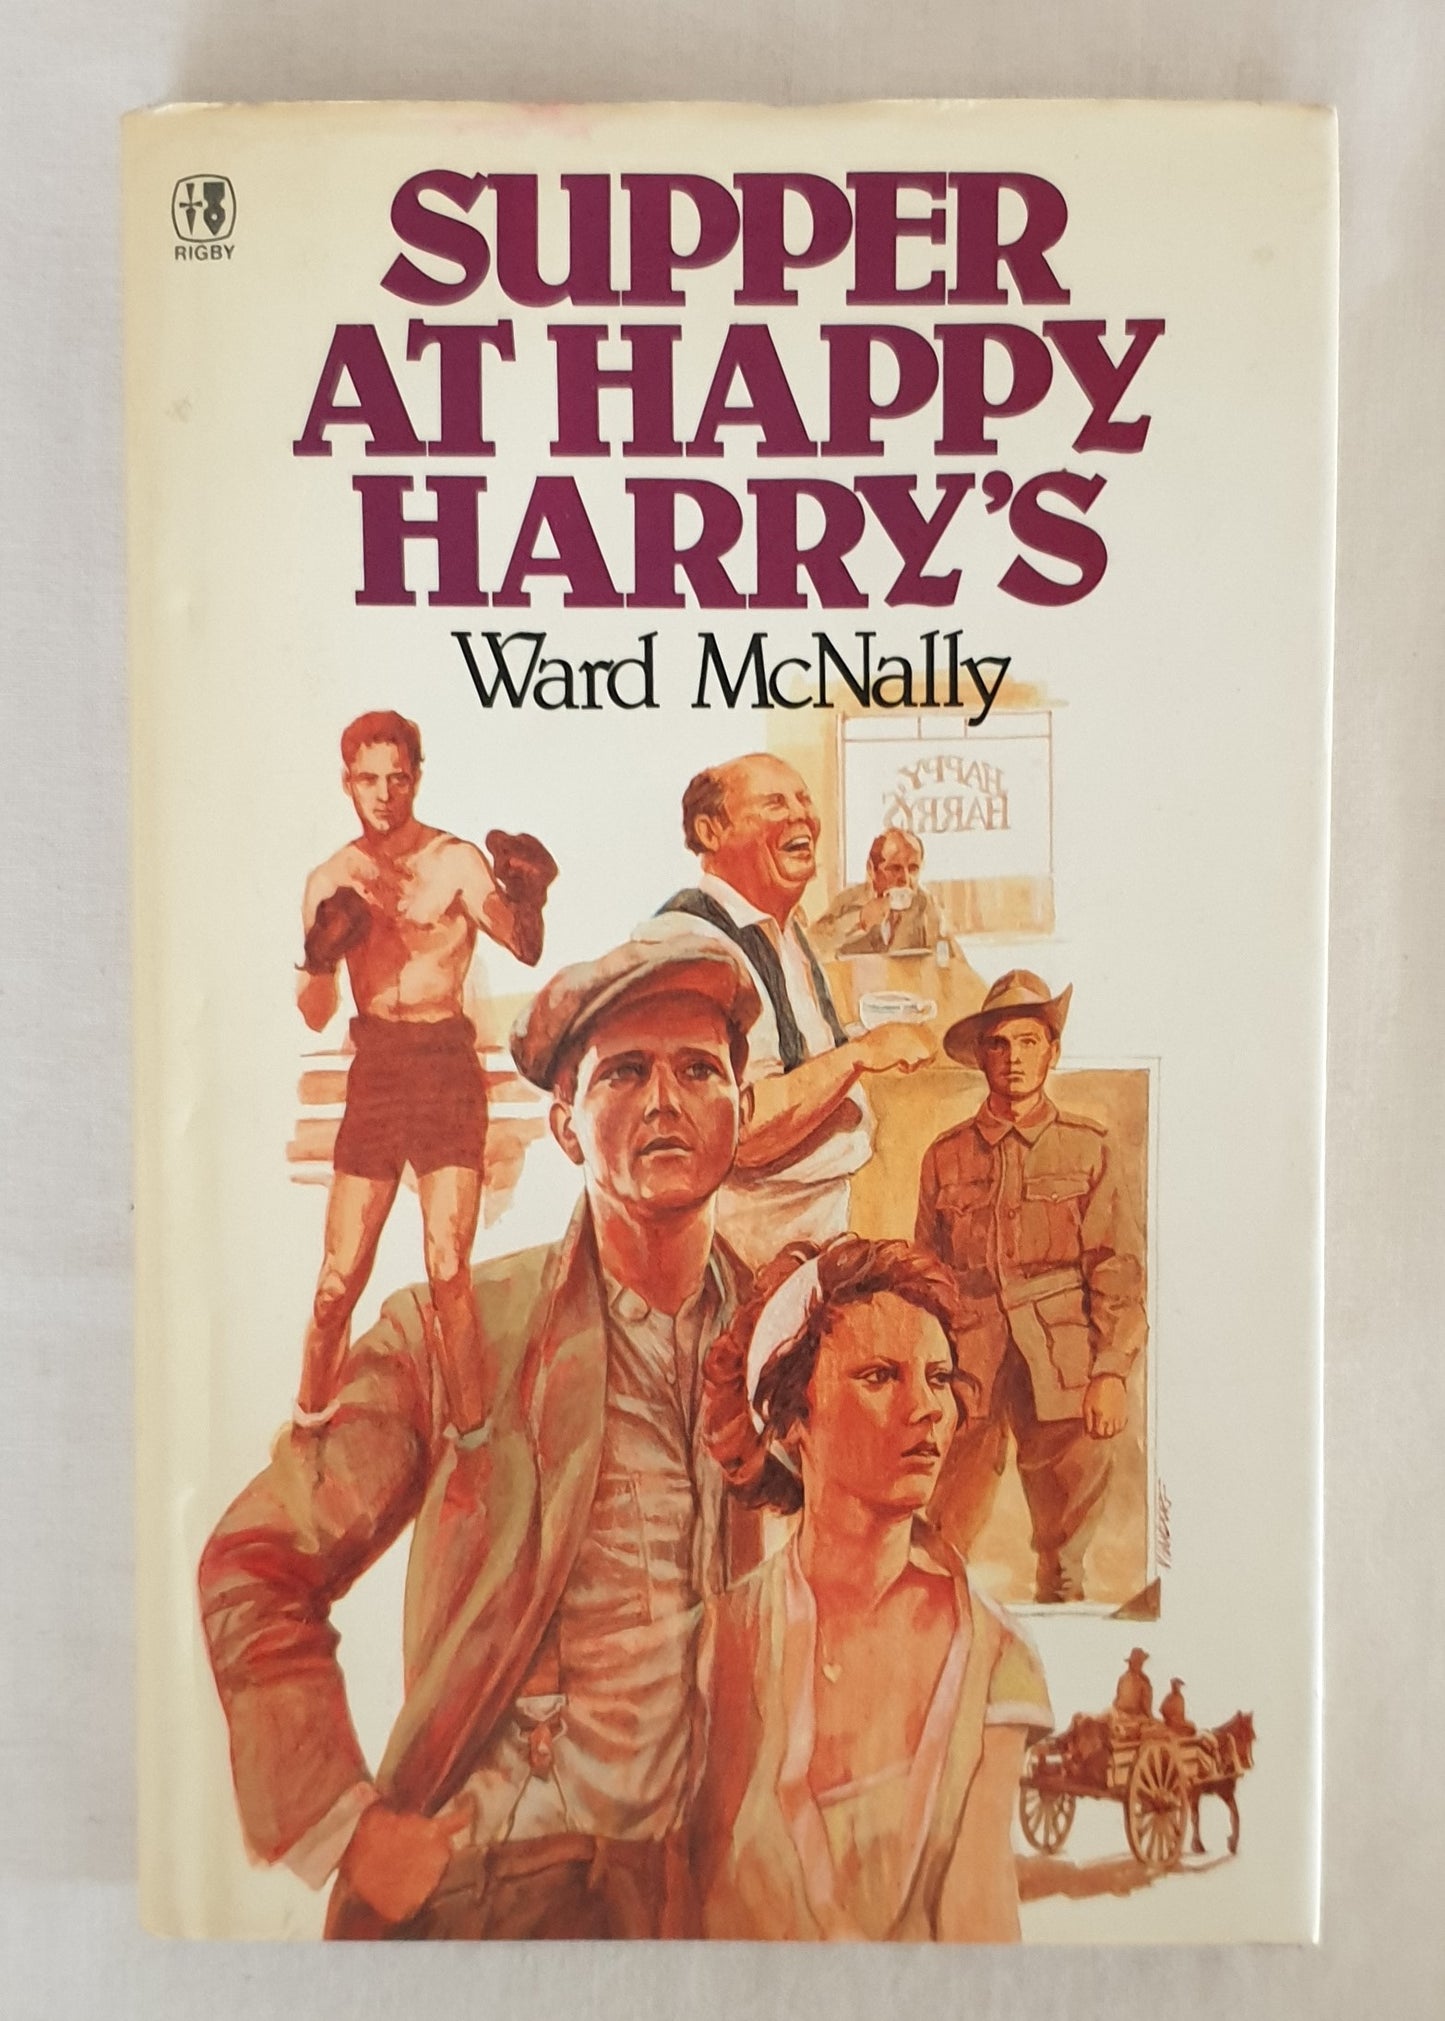 Supper At Happy Harry's by Ward McNally